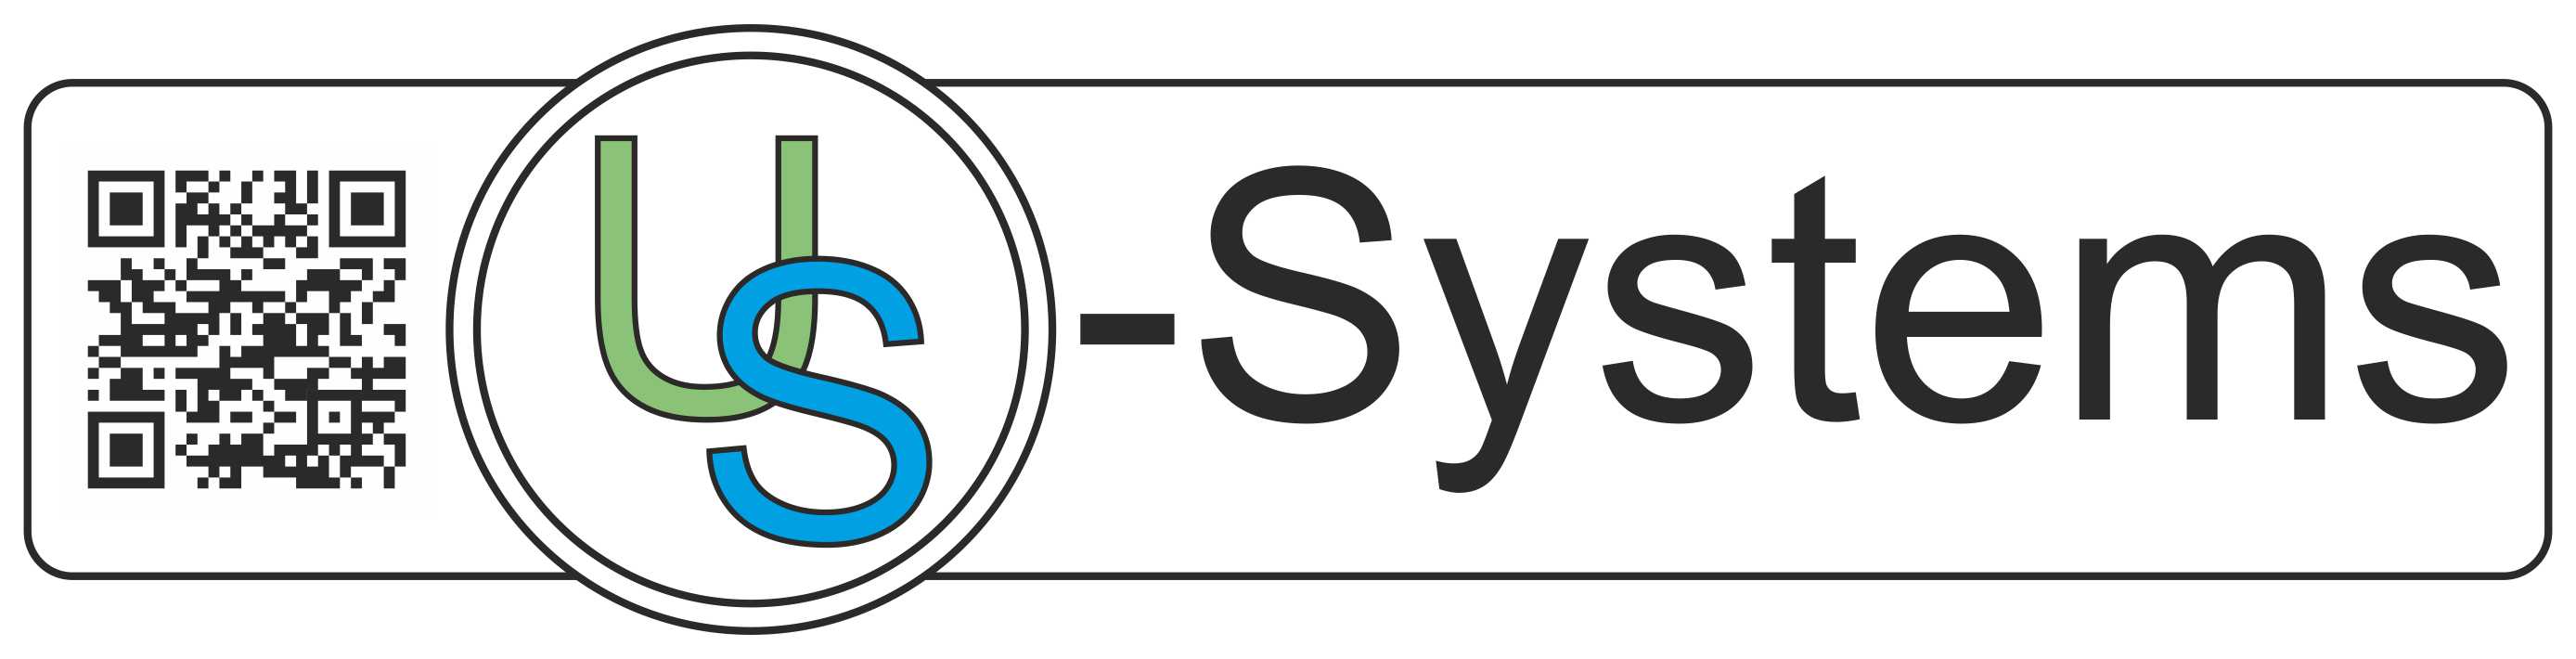 US-Systems